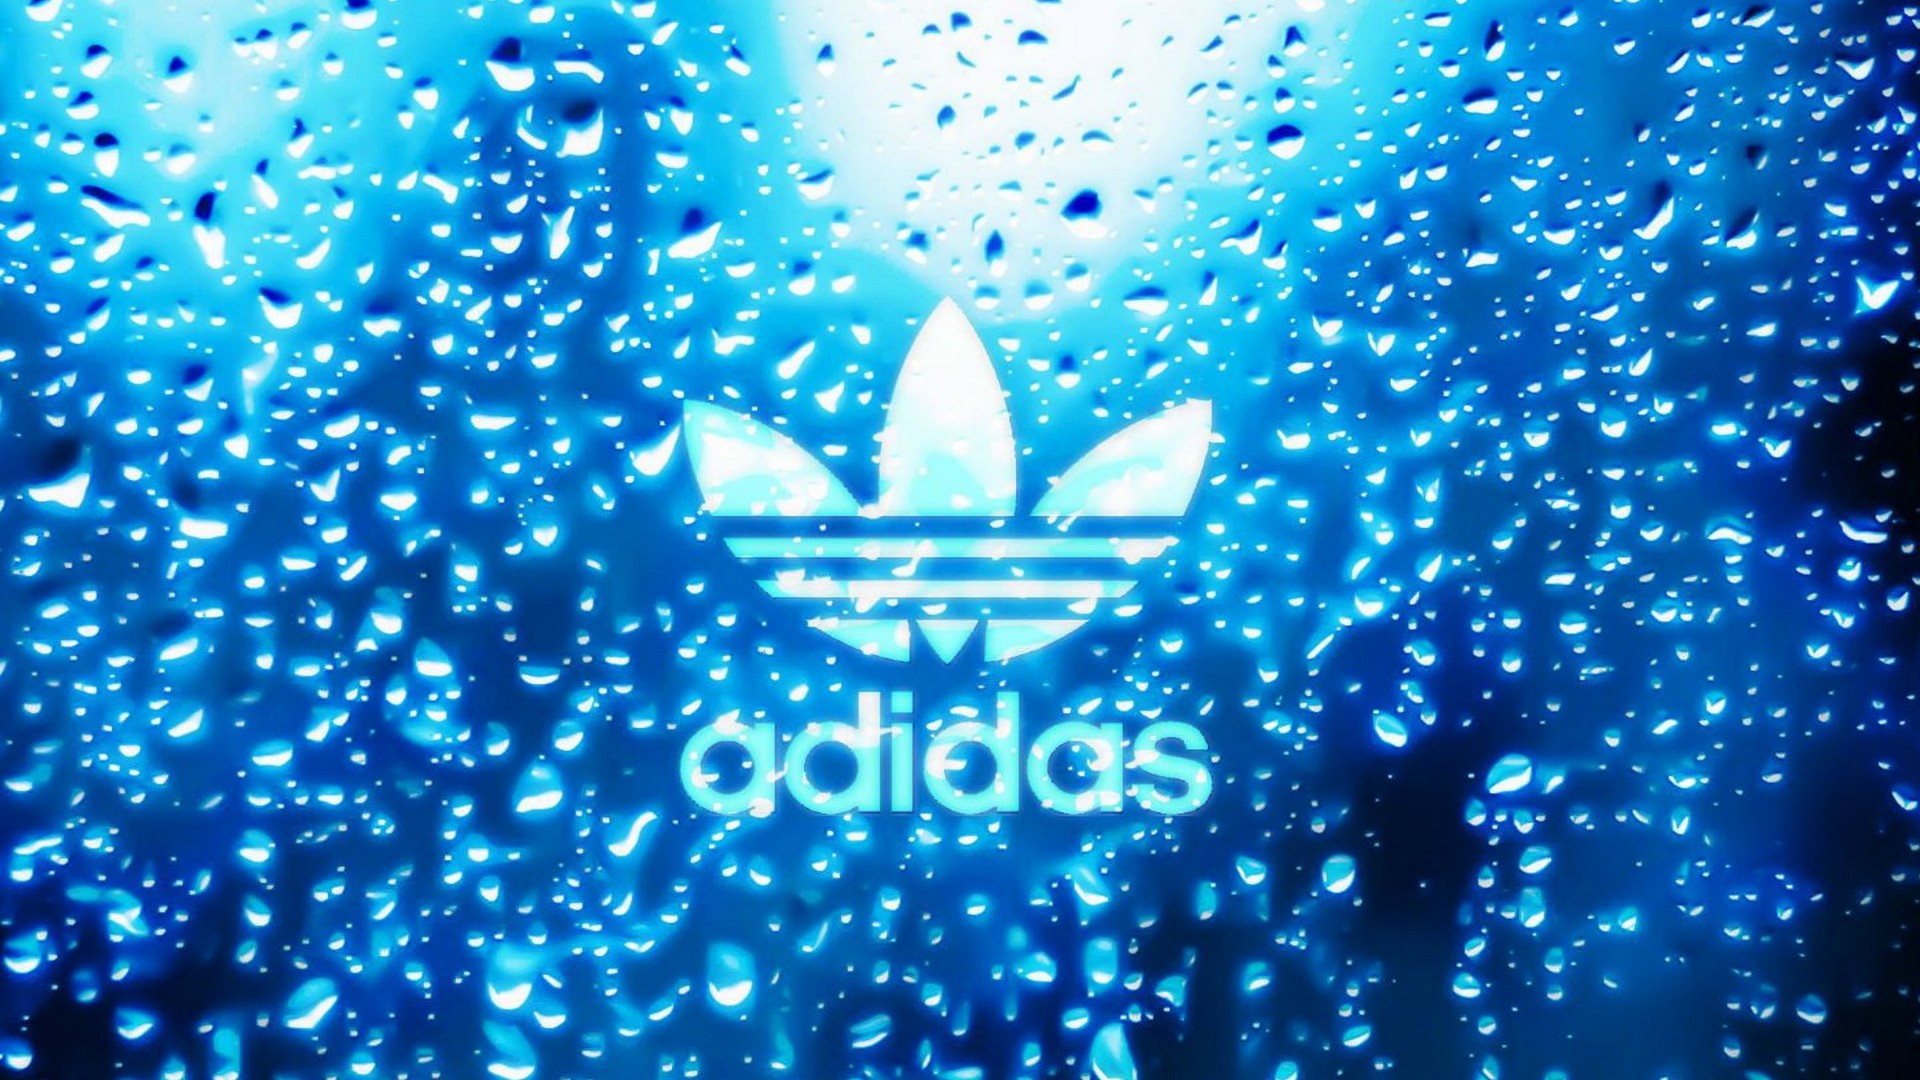 Adidas Desktop Backgrounds HD with high-resolution 1920x1080 pixel. You can use this wallpaper for your Windows and Mac OS computers as well as your Android and iPhone smartphones